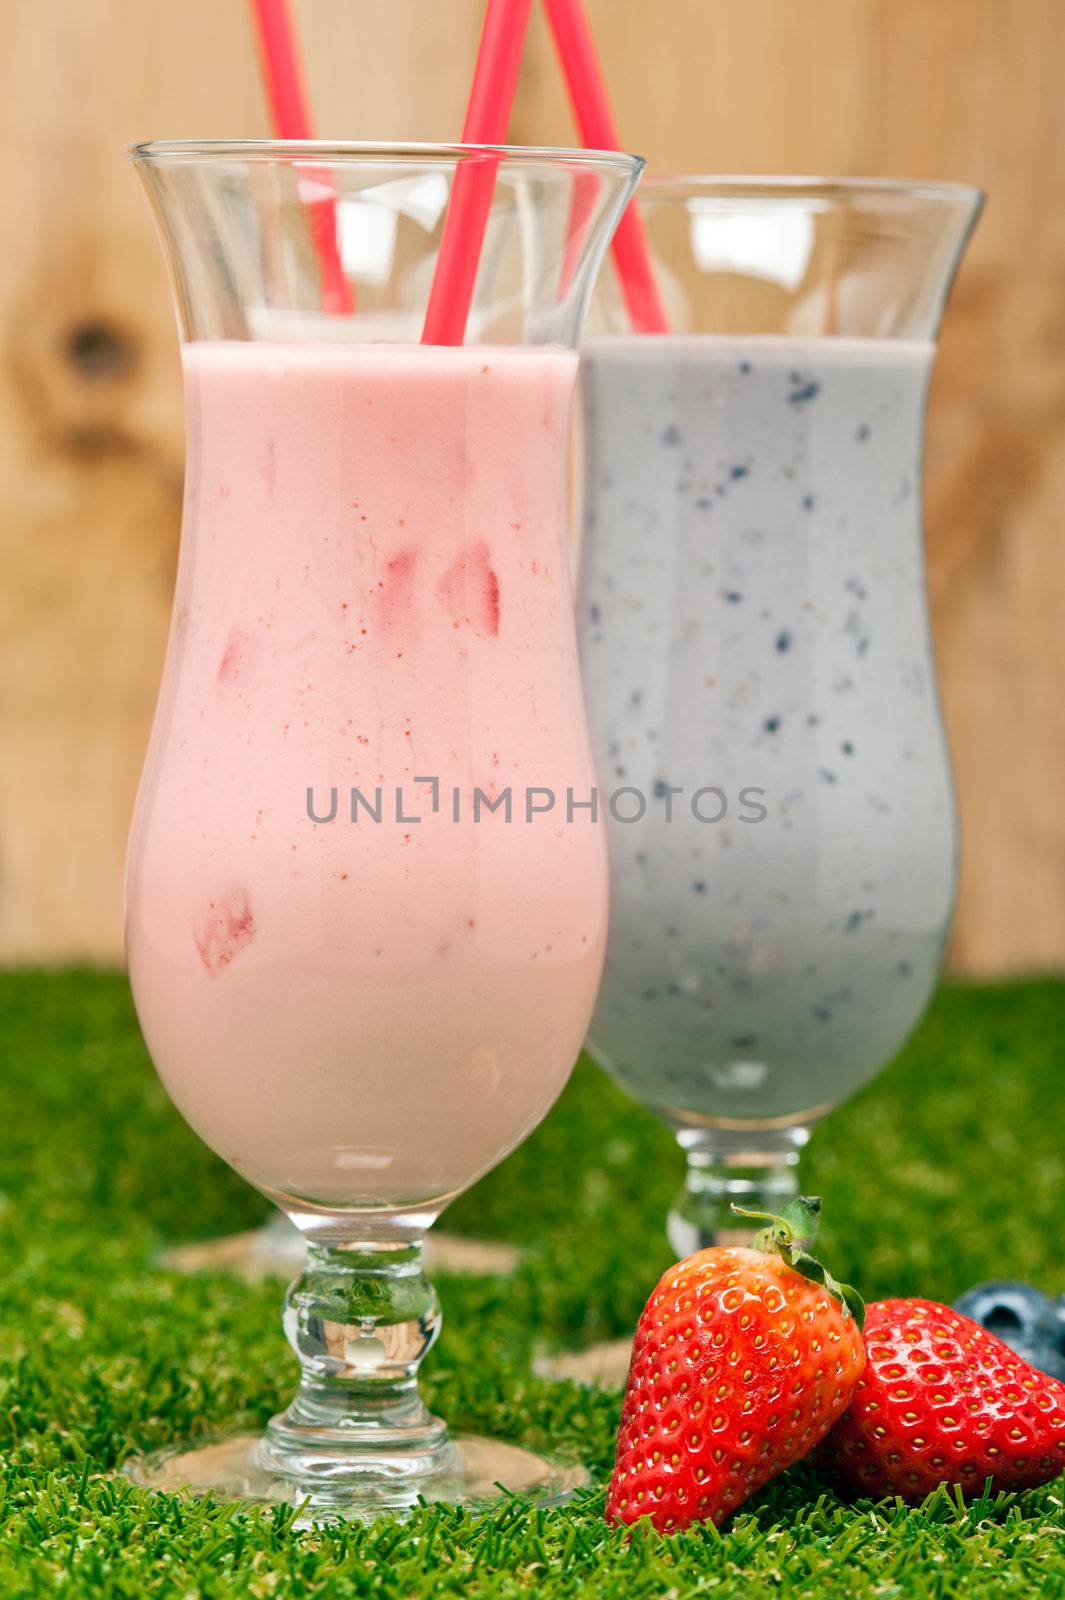 Blueberry and Strawberry milk shake with red straw